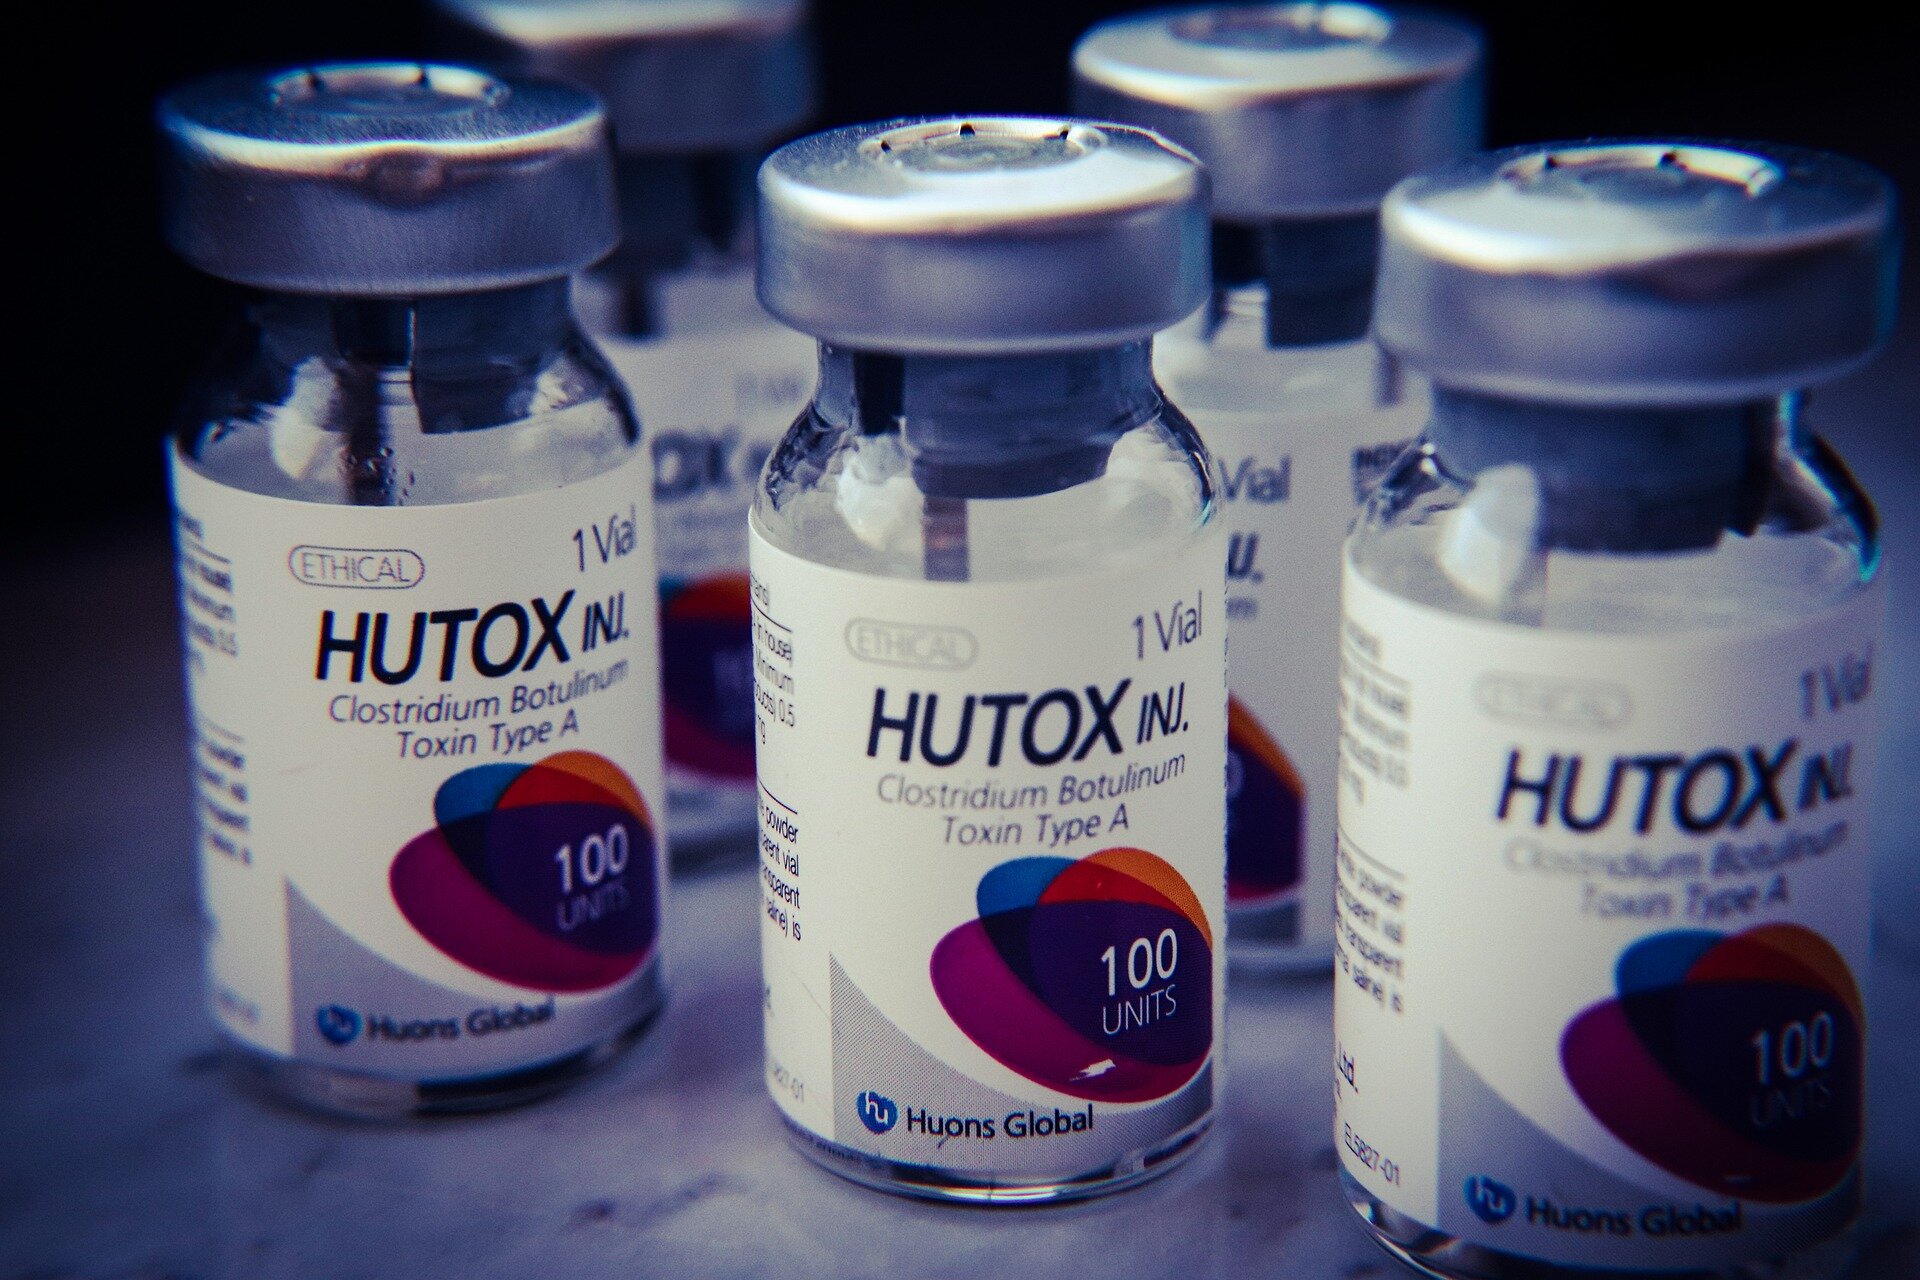 Unauthorized Botox Injections Cause Health Concerns in the US: CDC Warns Healthcare Professionals